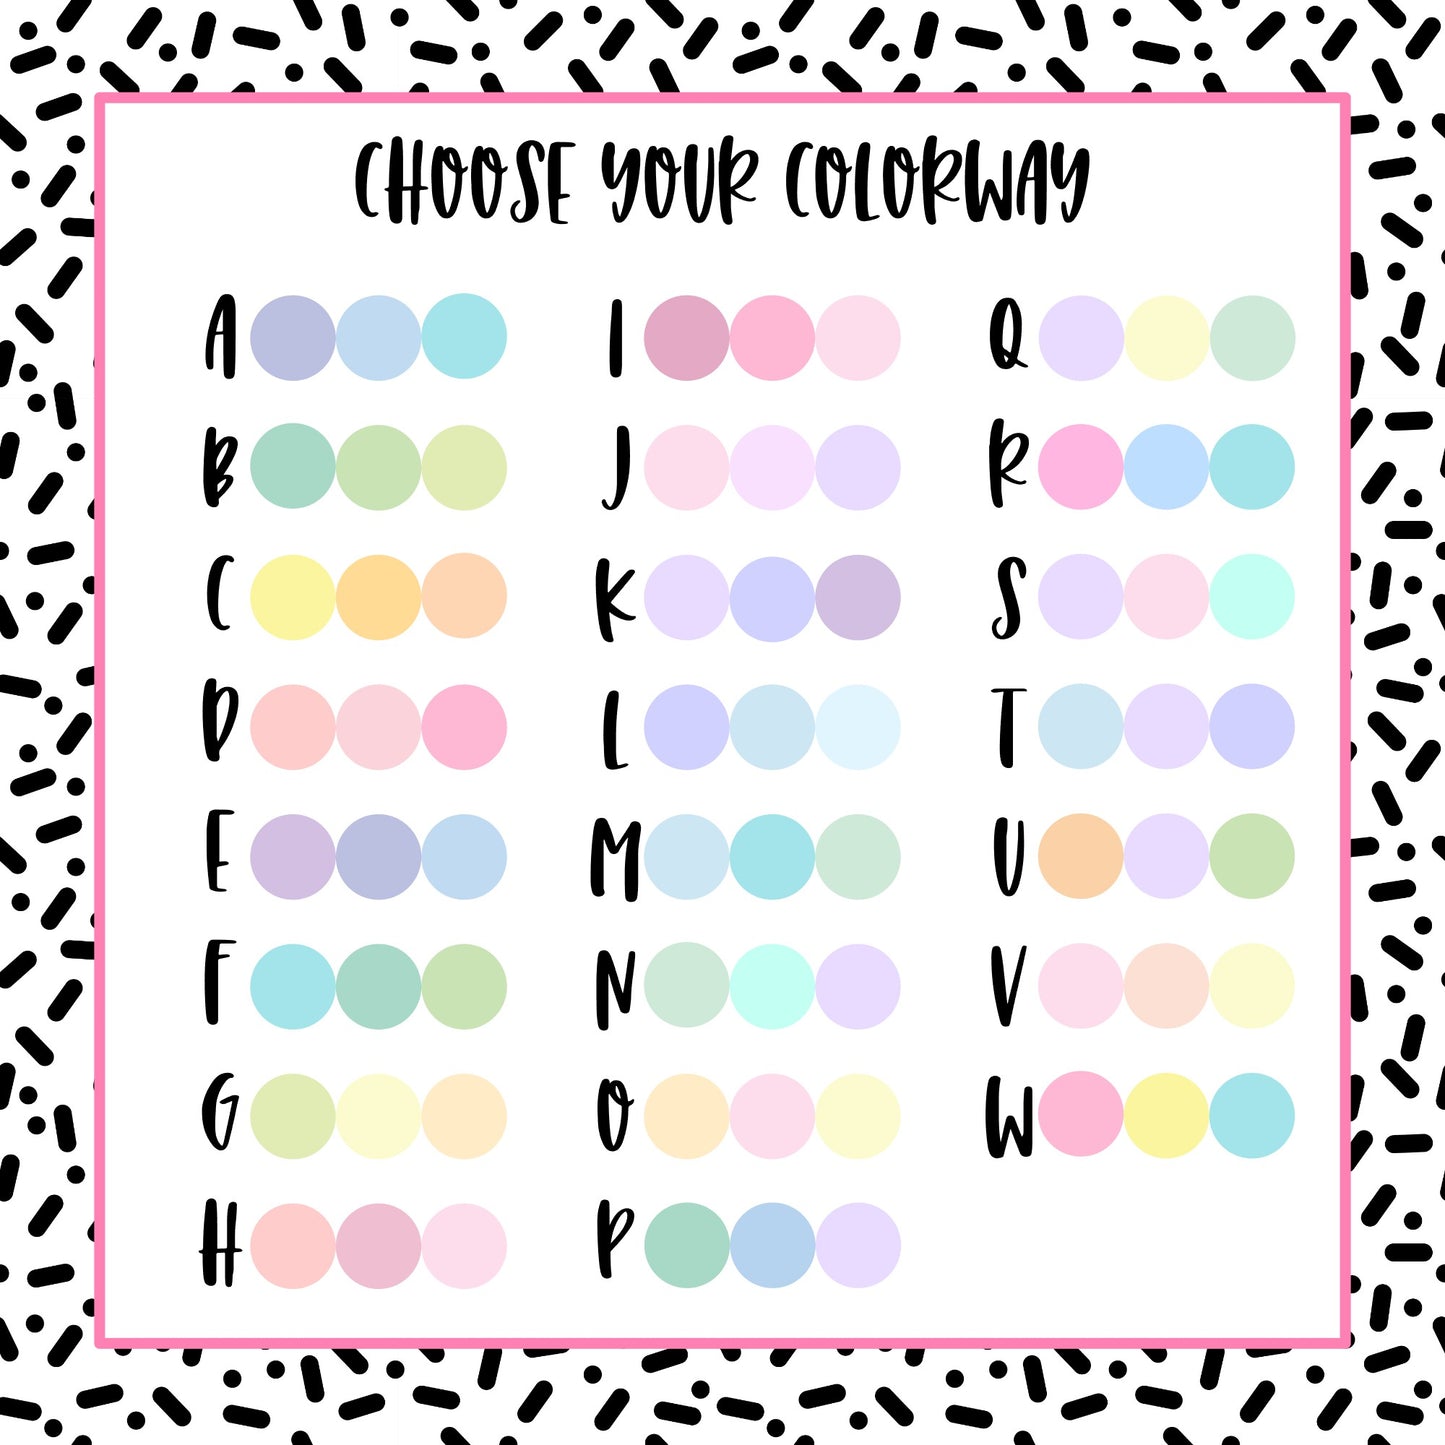 Pastel Squared Shadowed Boxes - 24 color options